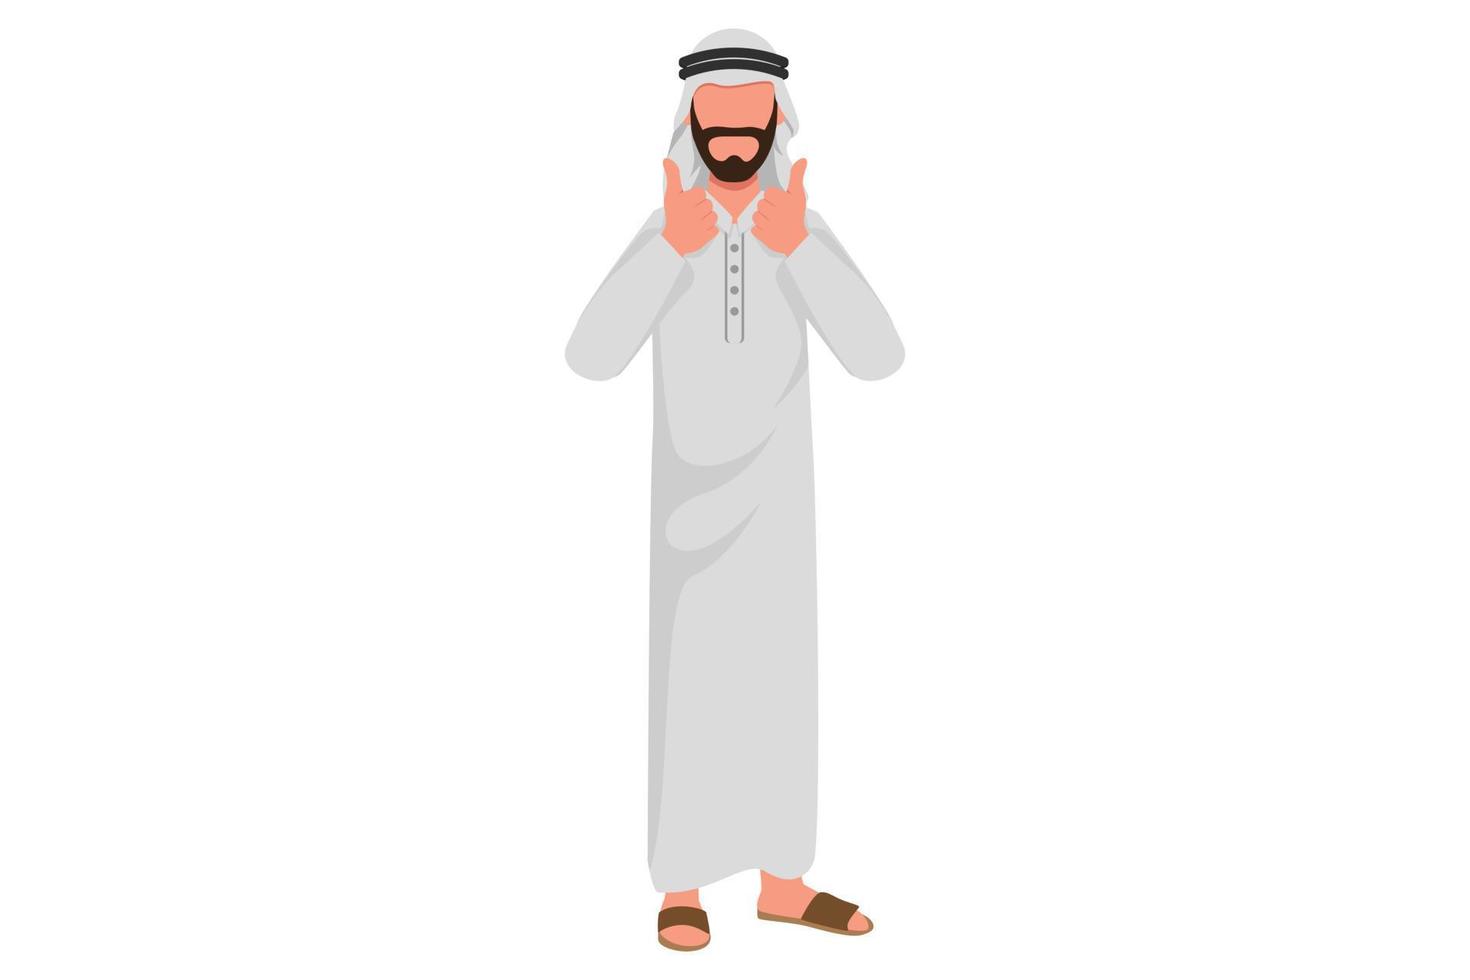 Business design drawing excited Arabian businessman in traditional clothes showing thumbs up sign. Like, agree, approve, accept. Man with two thumbs up gesture. Flat cartoon style vector illustration